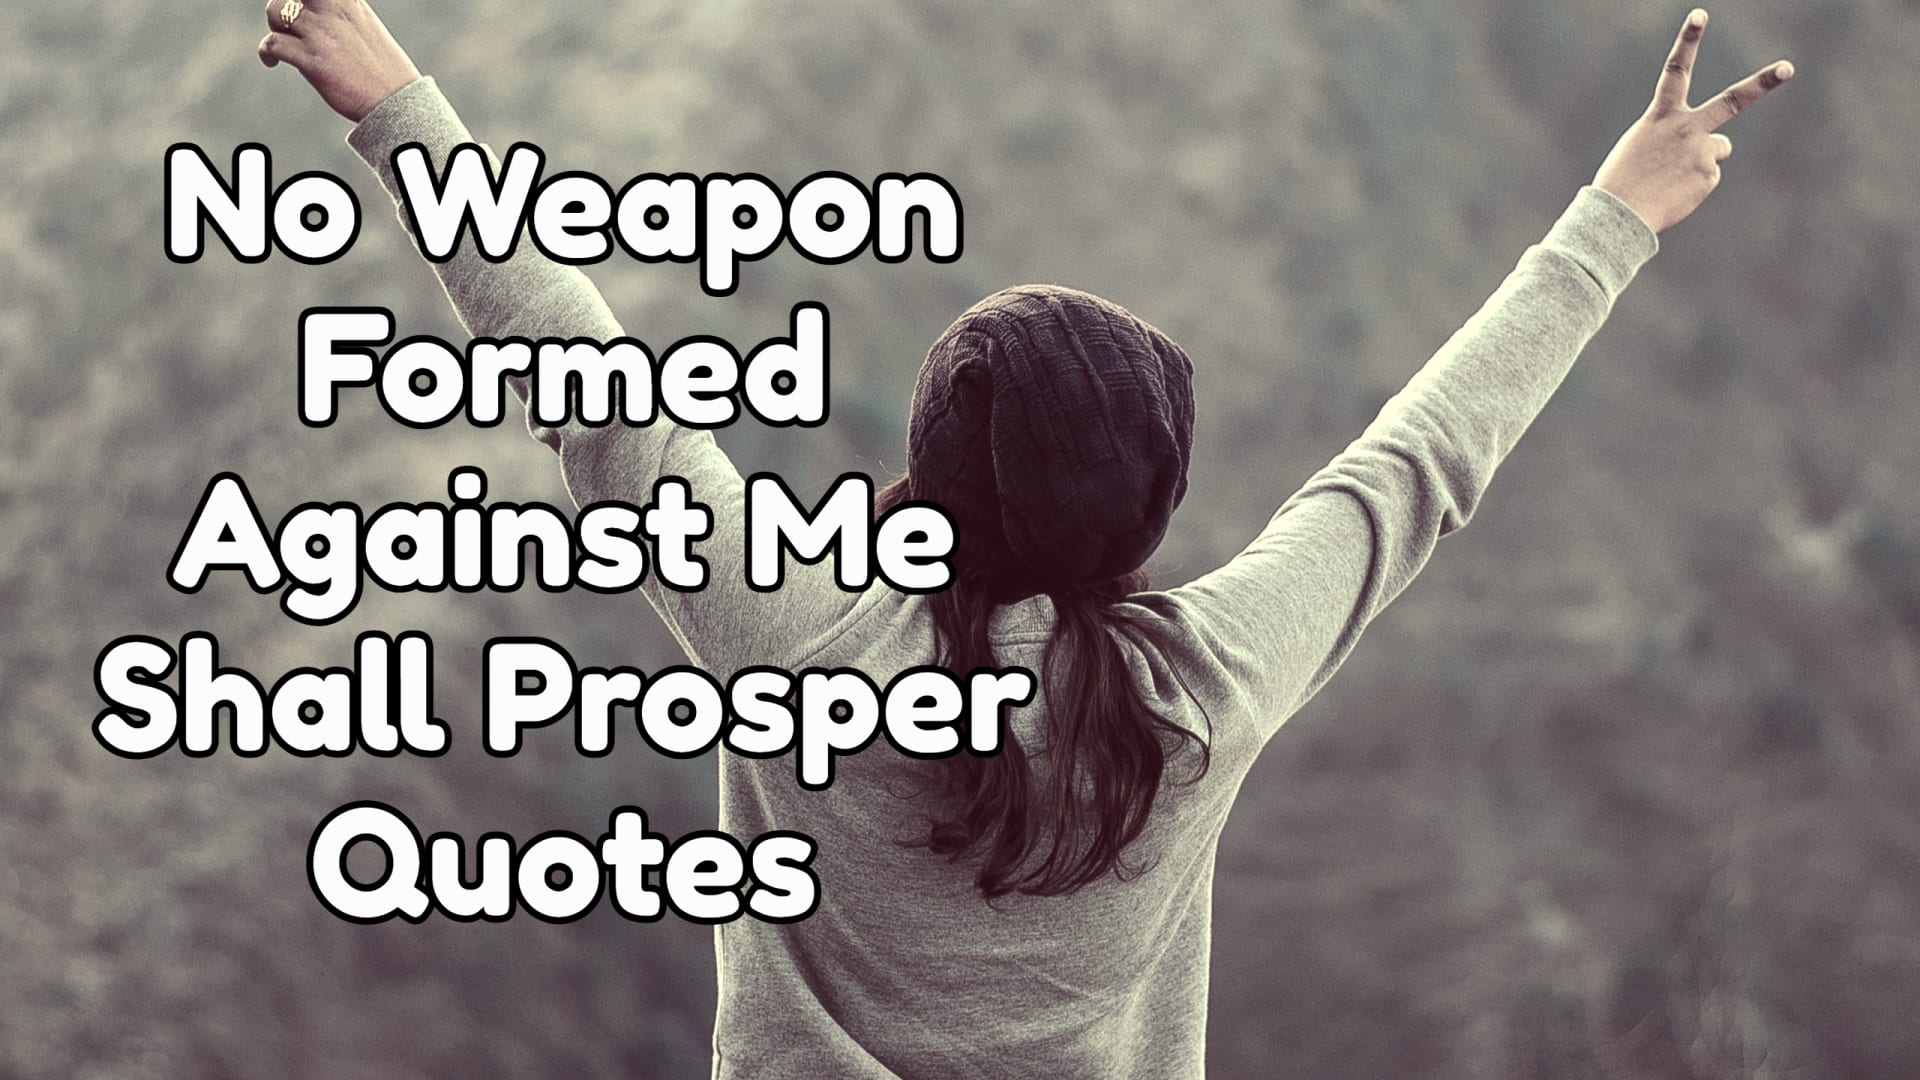 No Weapon Formed Against Me Shall Prosper Quotes